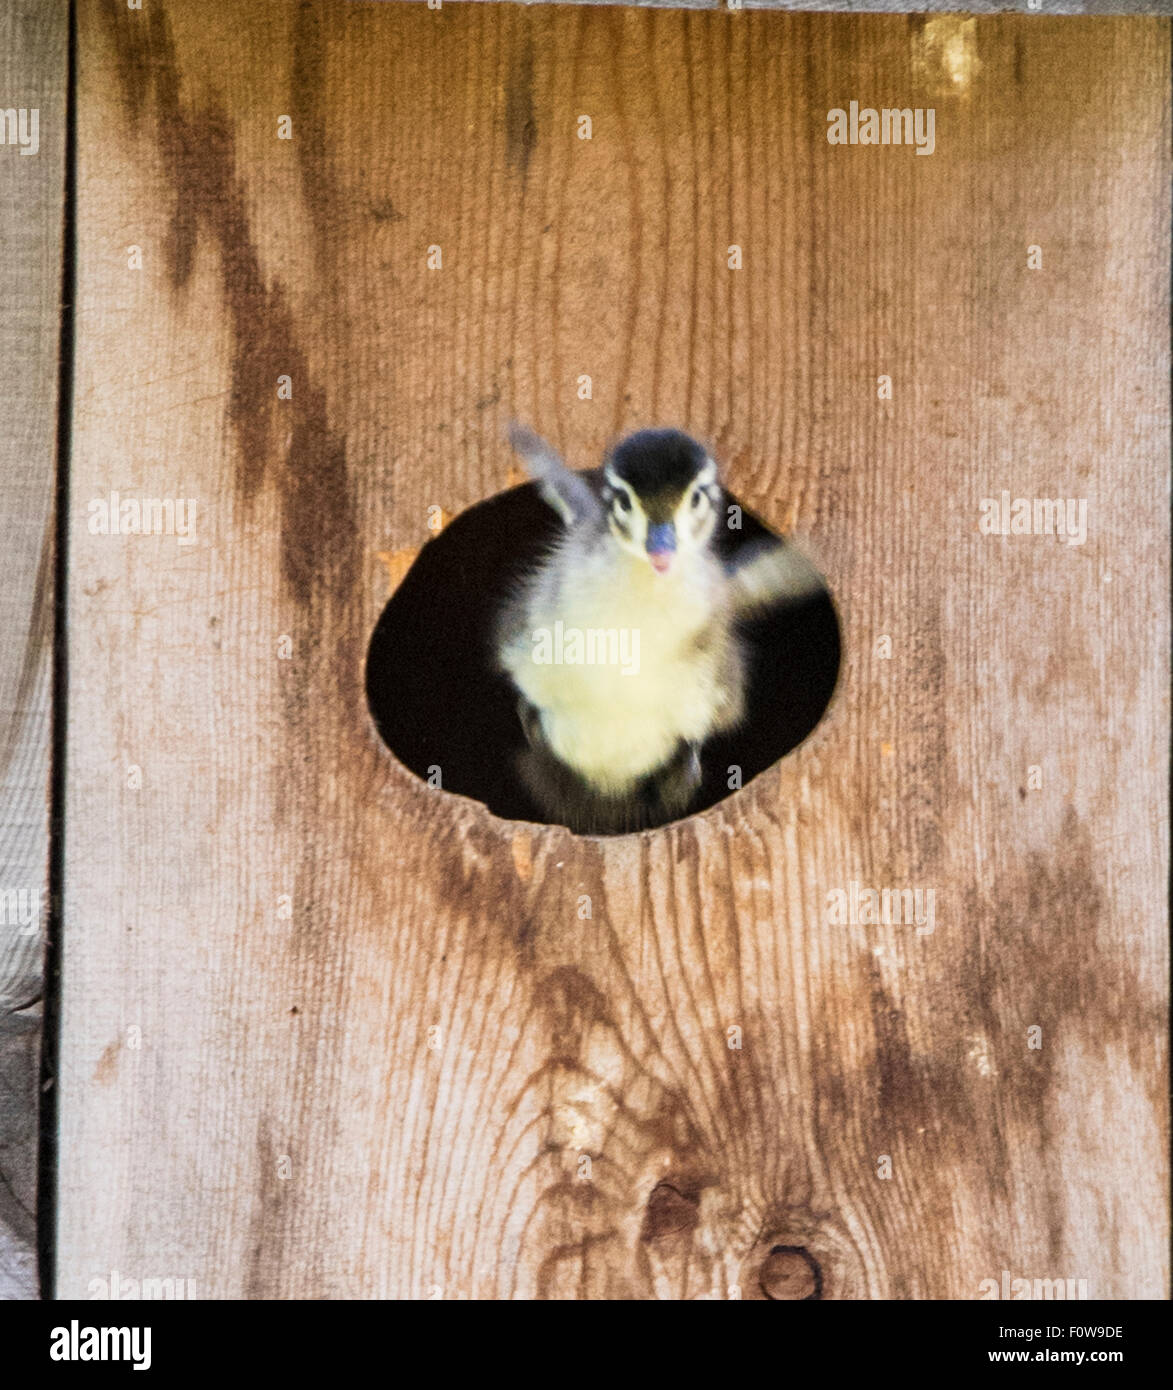 Wildlife, Wood Ducks, New Born chick flying out of the Wood Duck Box/Nest to the ground below. Boise, Idaho, USA Stock Photo